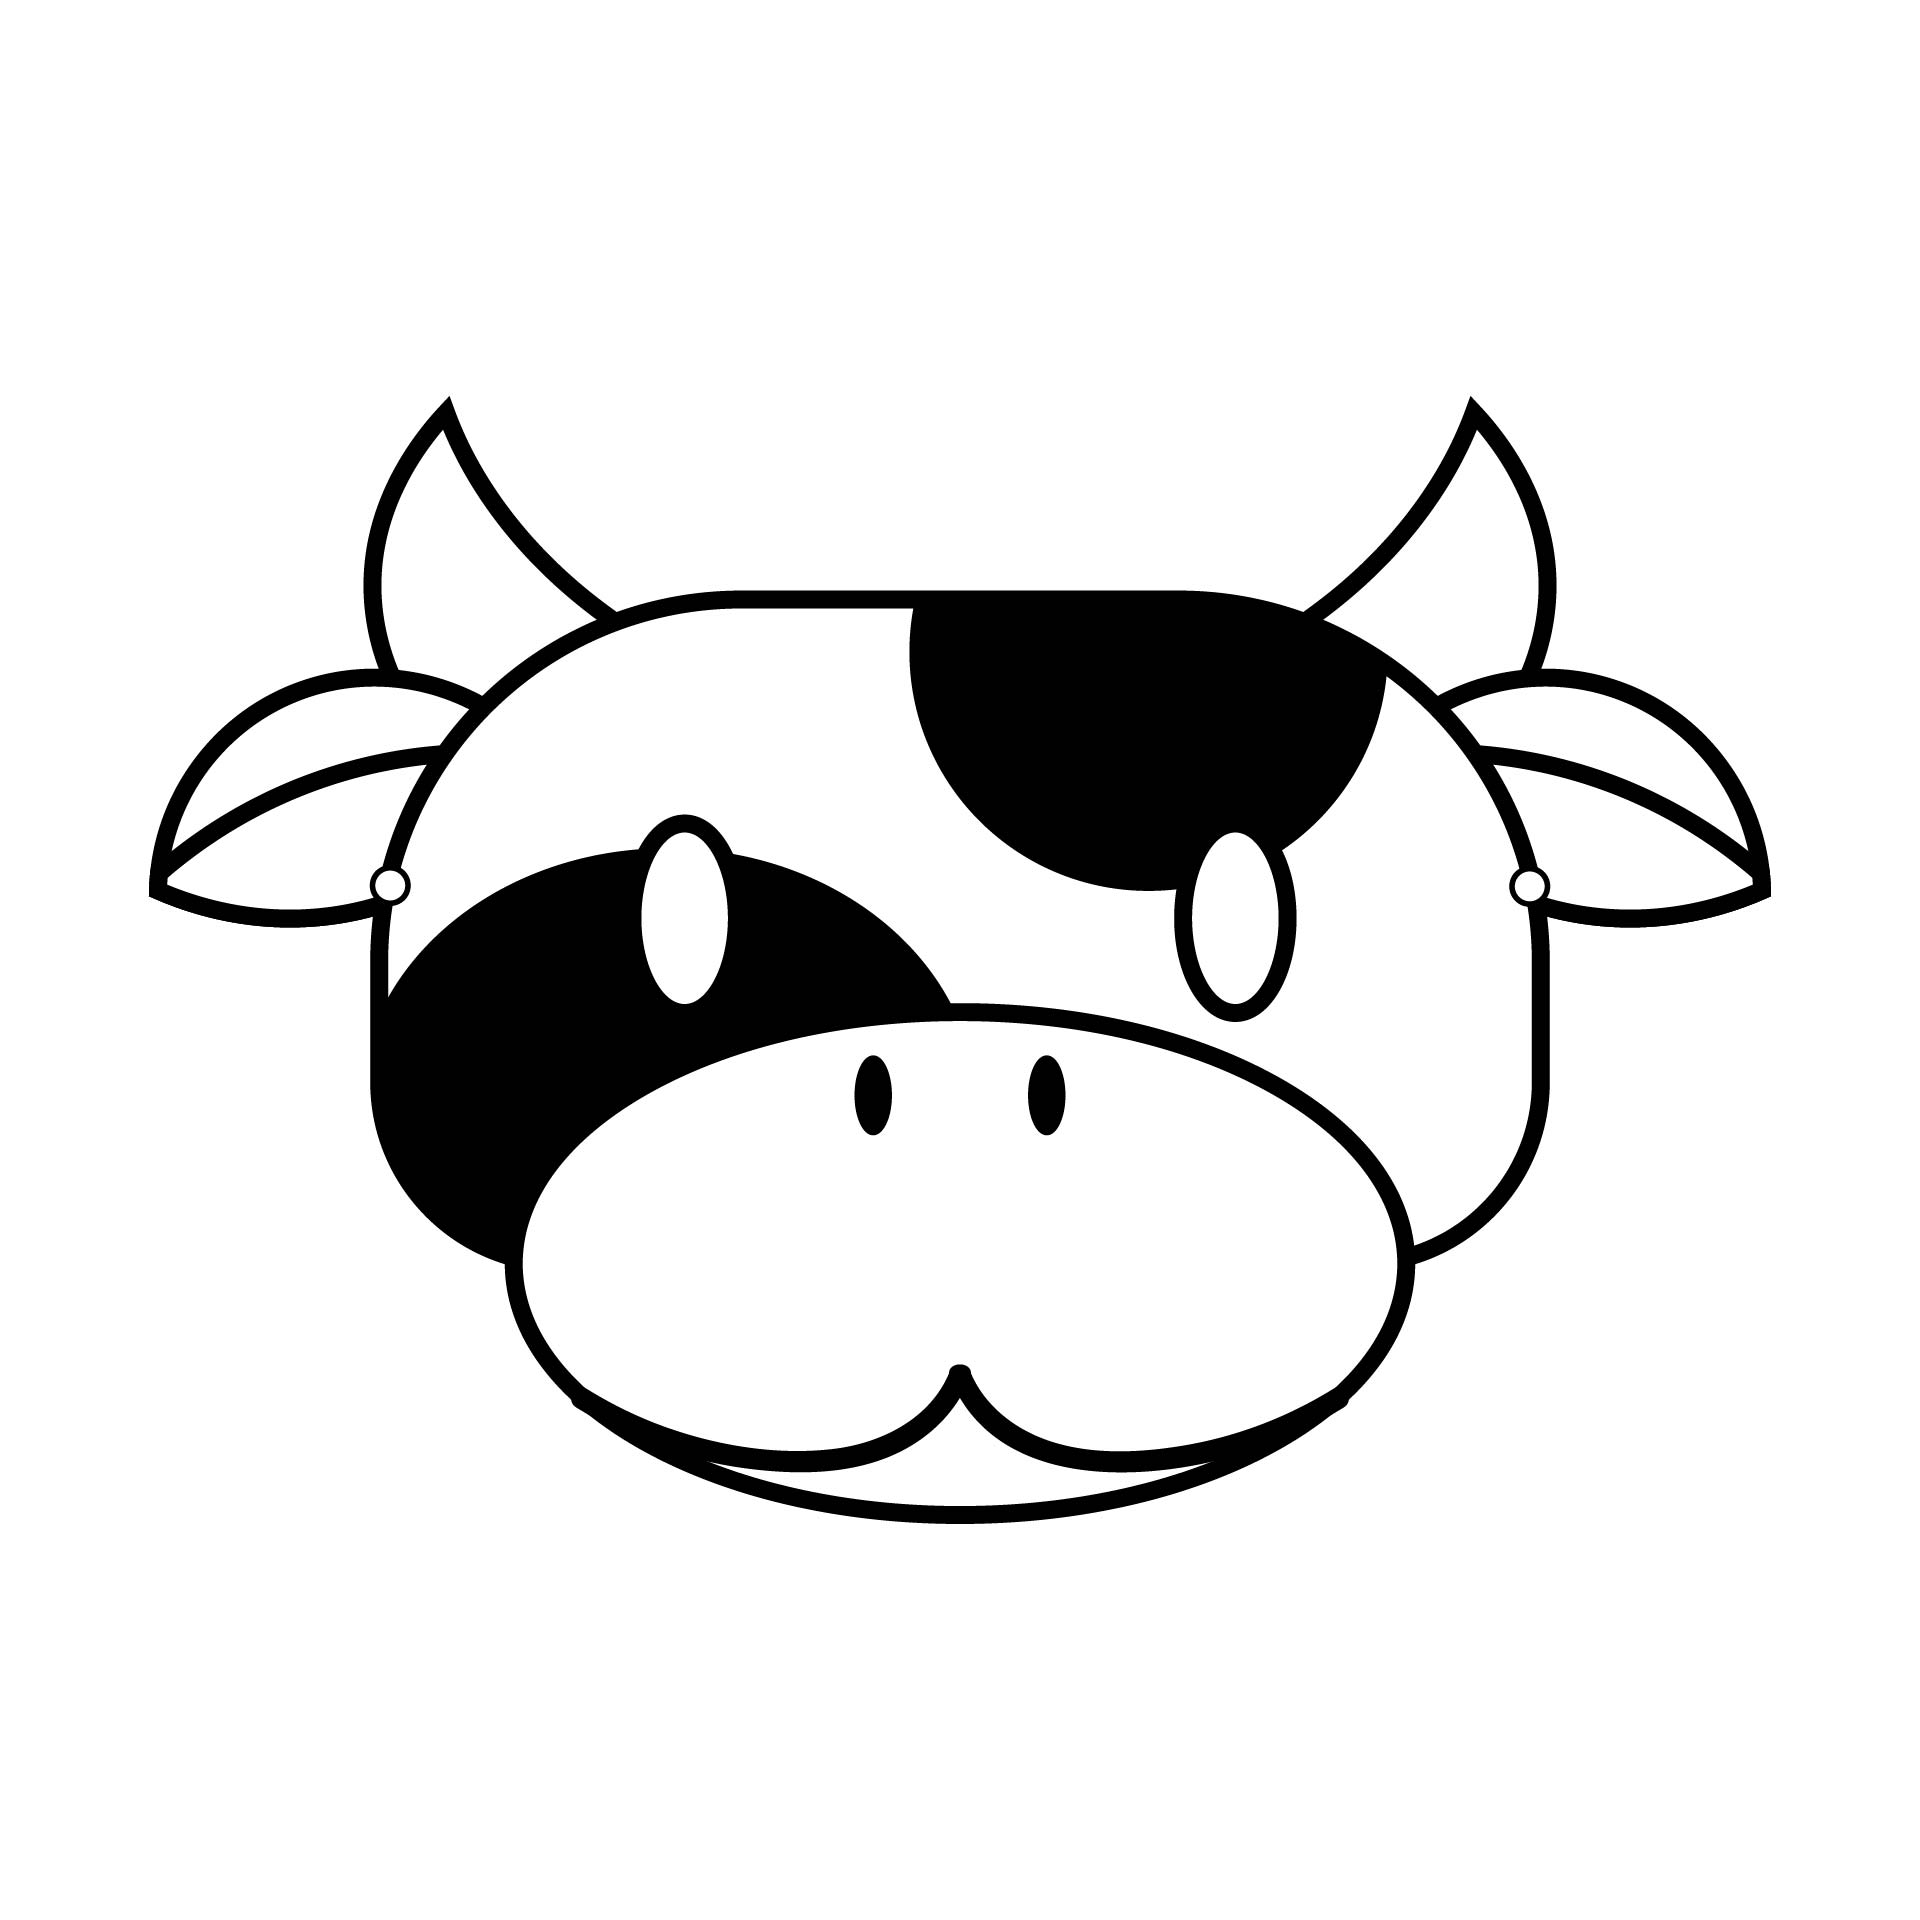 8-best-images-of-free-printable-cow-mask-printable-cow-mask-template